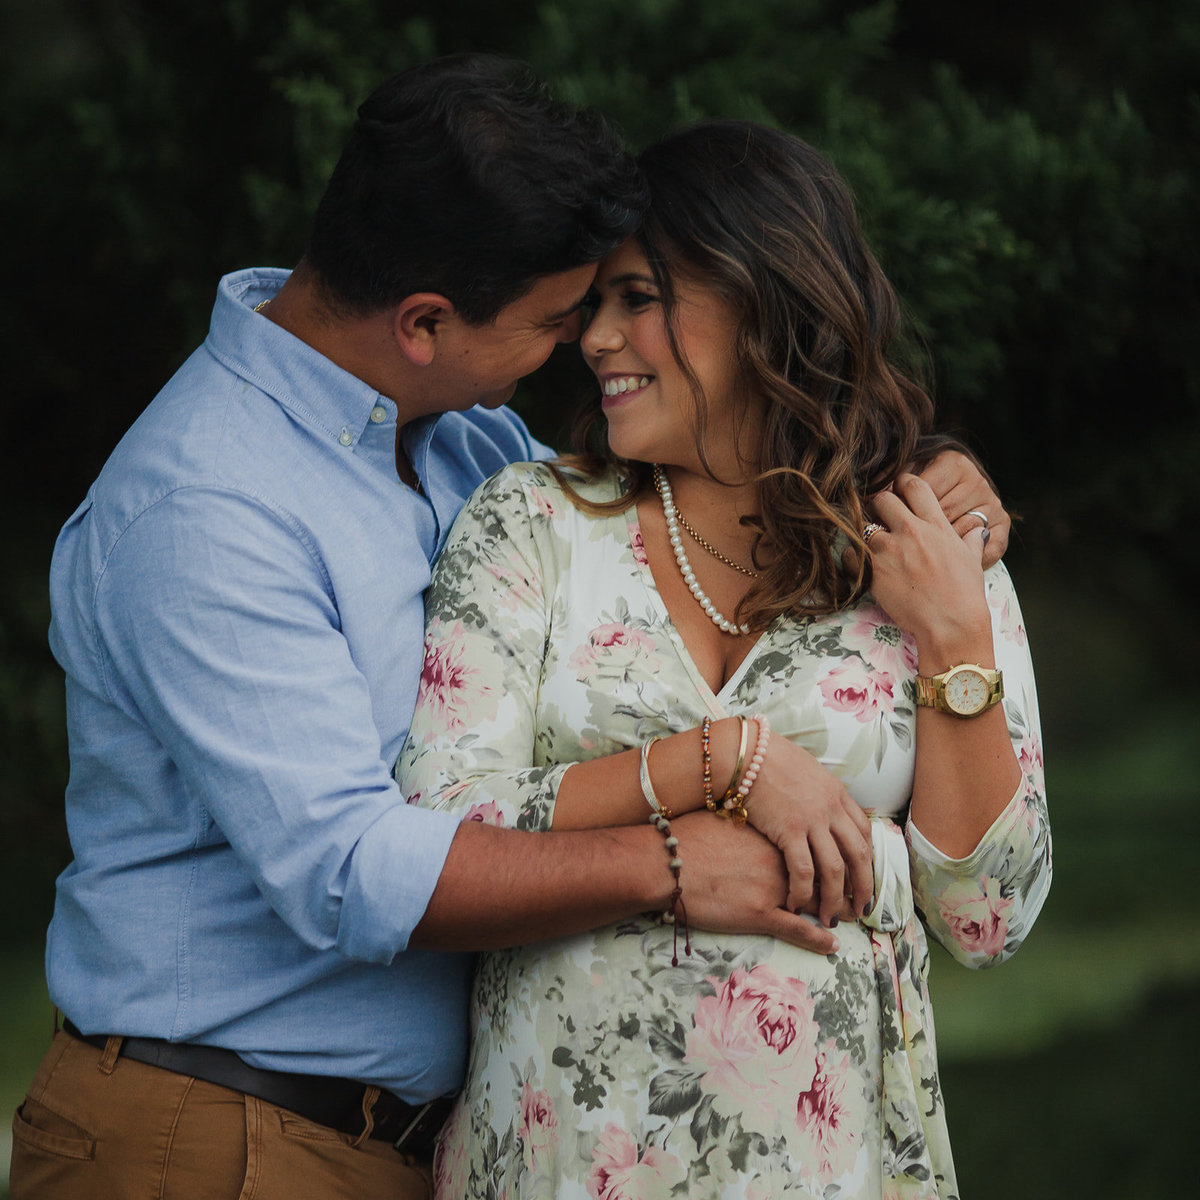 26Maryland-Outdoor-Maternity-Cylburn-Arboretum-Floral-Dress-Couple-Fall